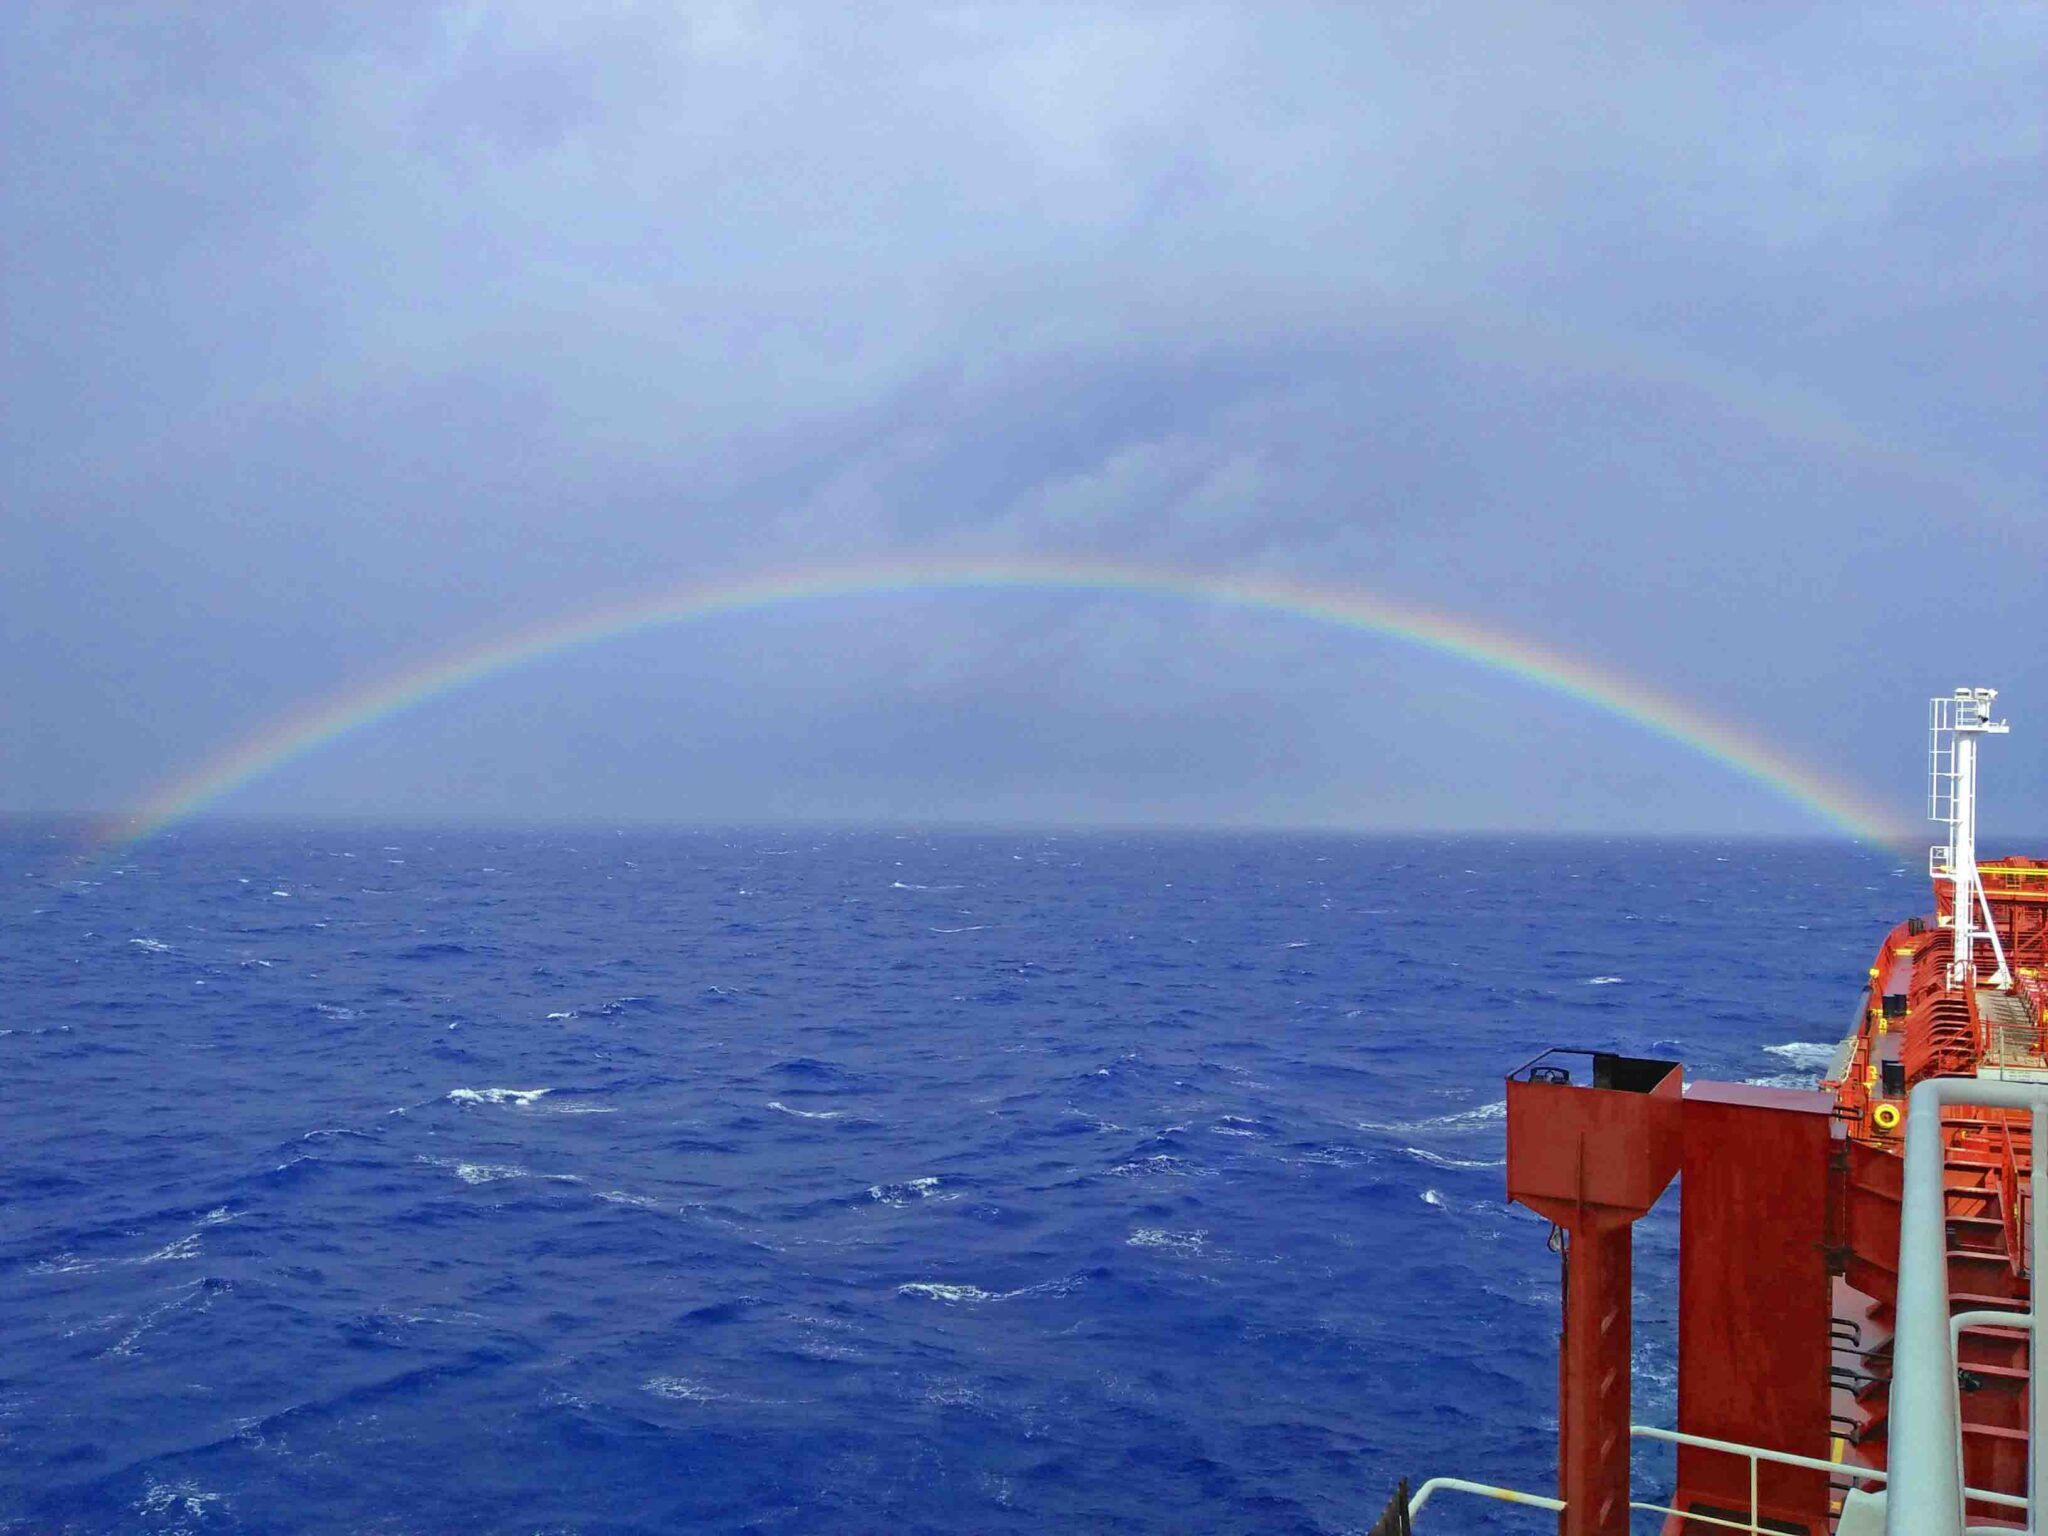 Rainbow forming over the horizon on the port bow of a tanker vessel.